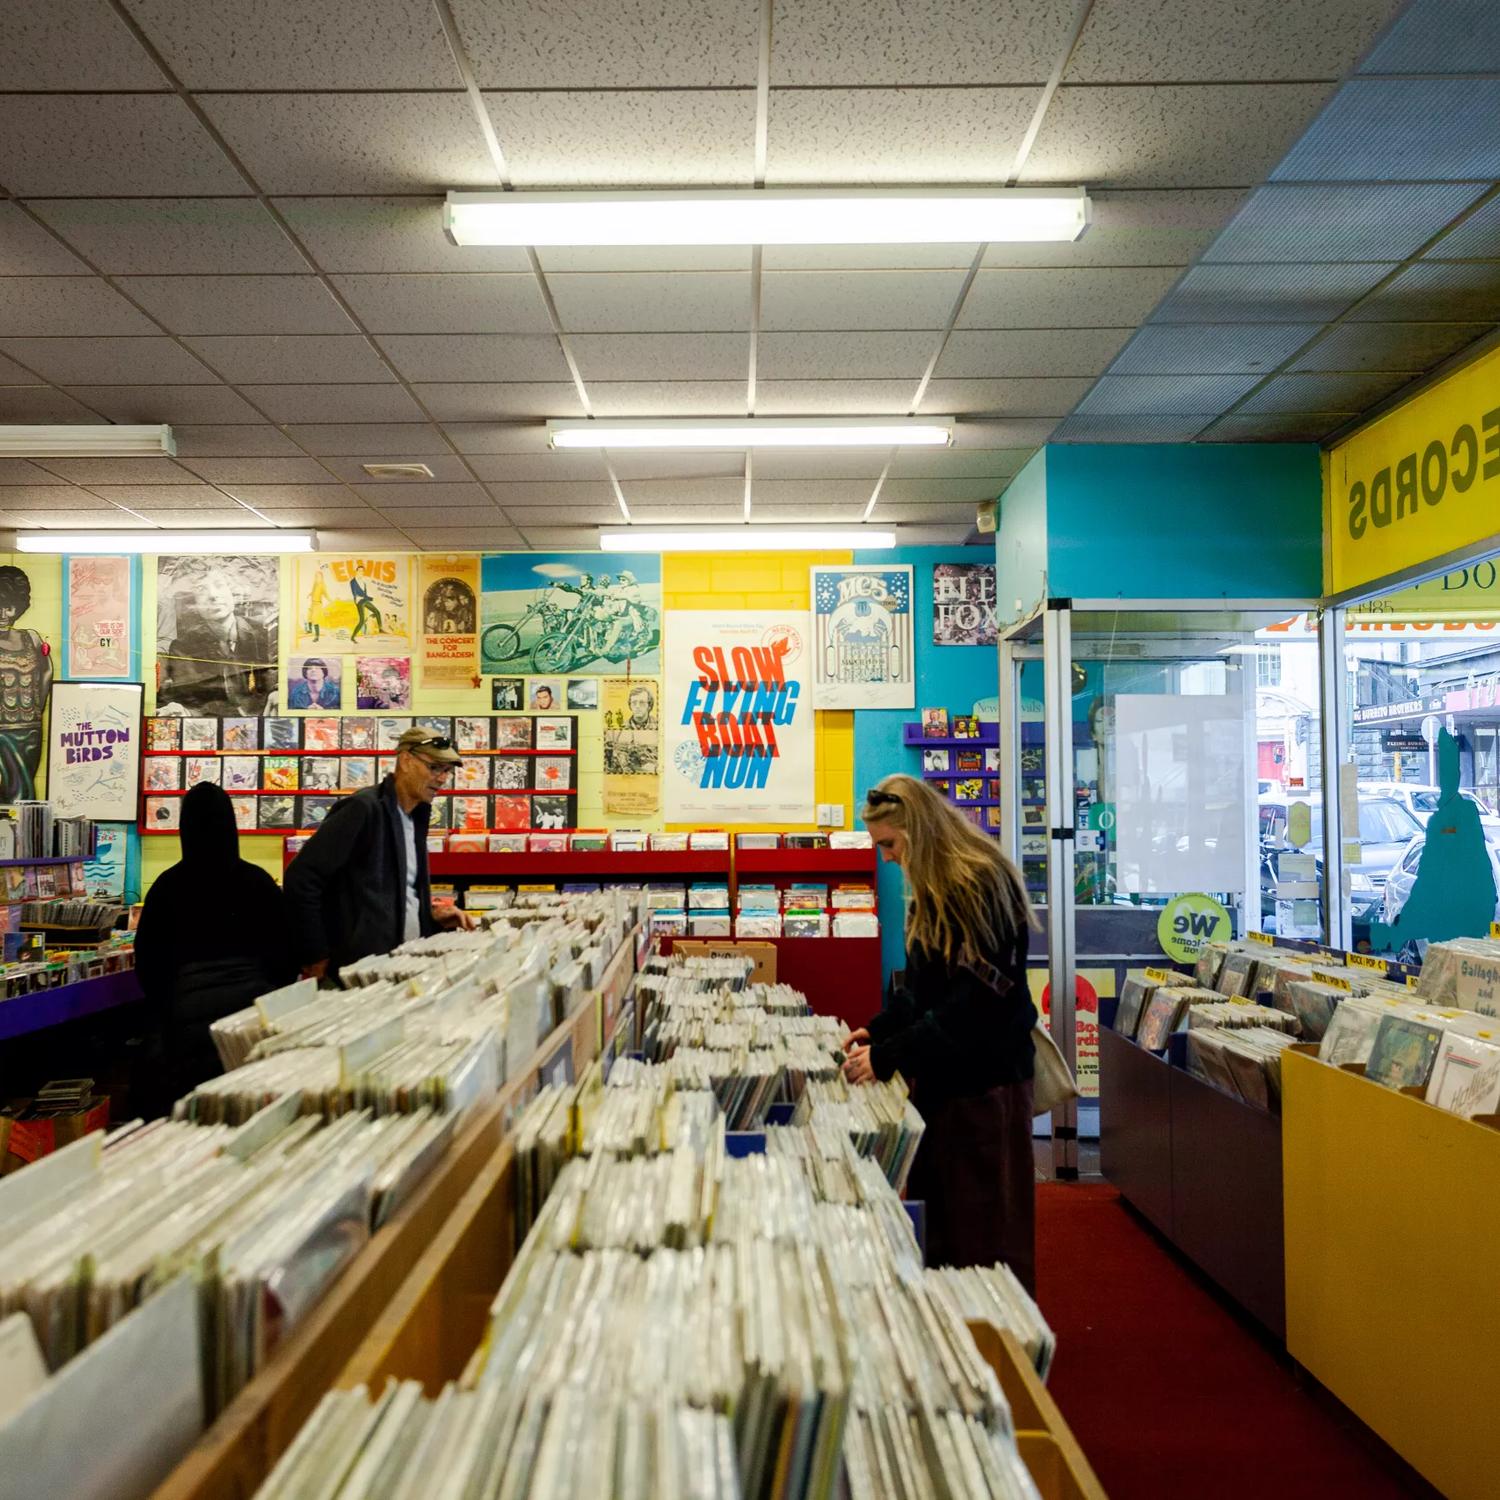 The interior of Slow Boat Records, a record store located on Cuba Street in Te Aro, Wellington. The Blue and yellow walls are covered in posters and three people browse the store's selection.